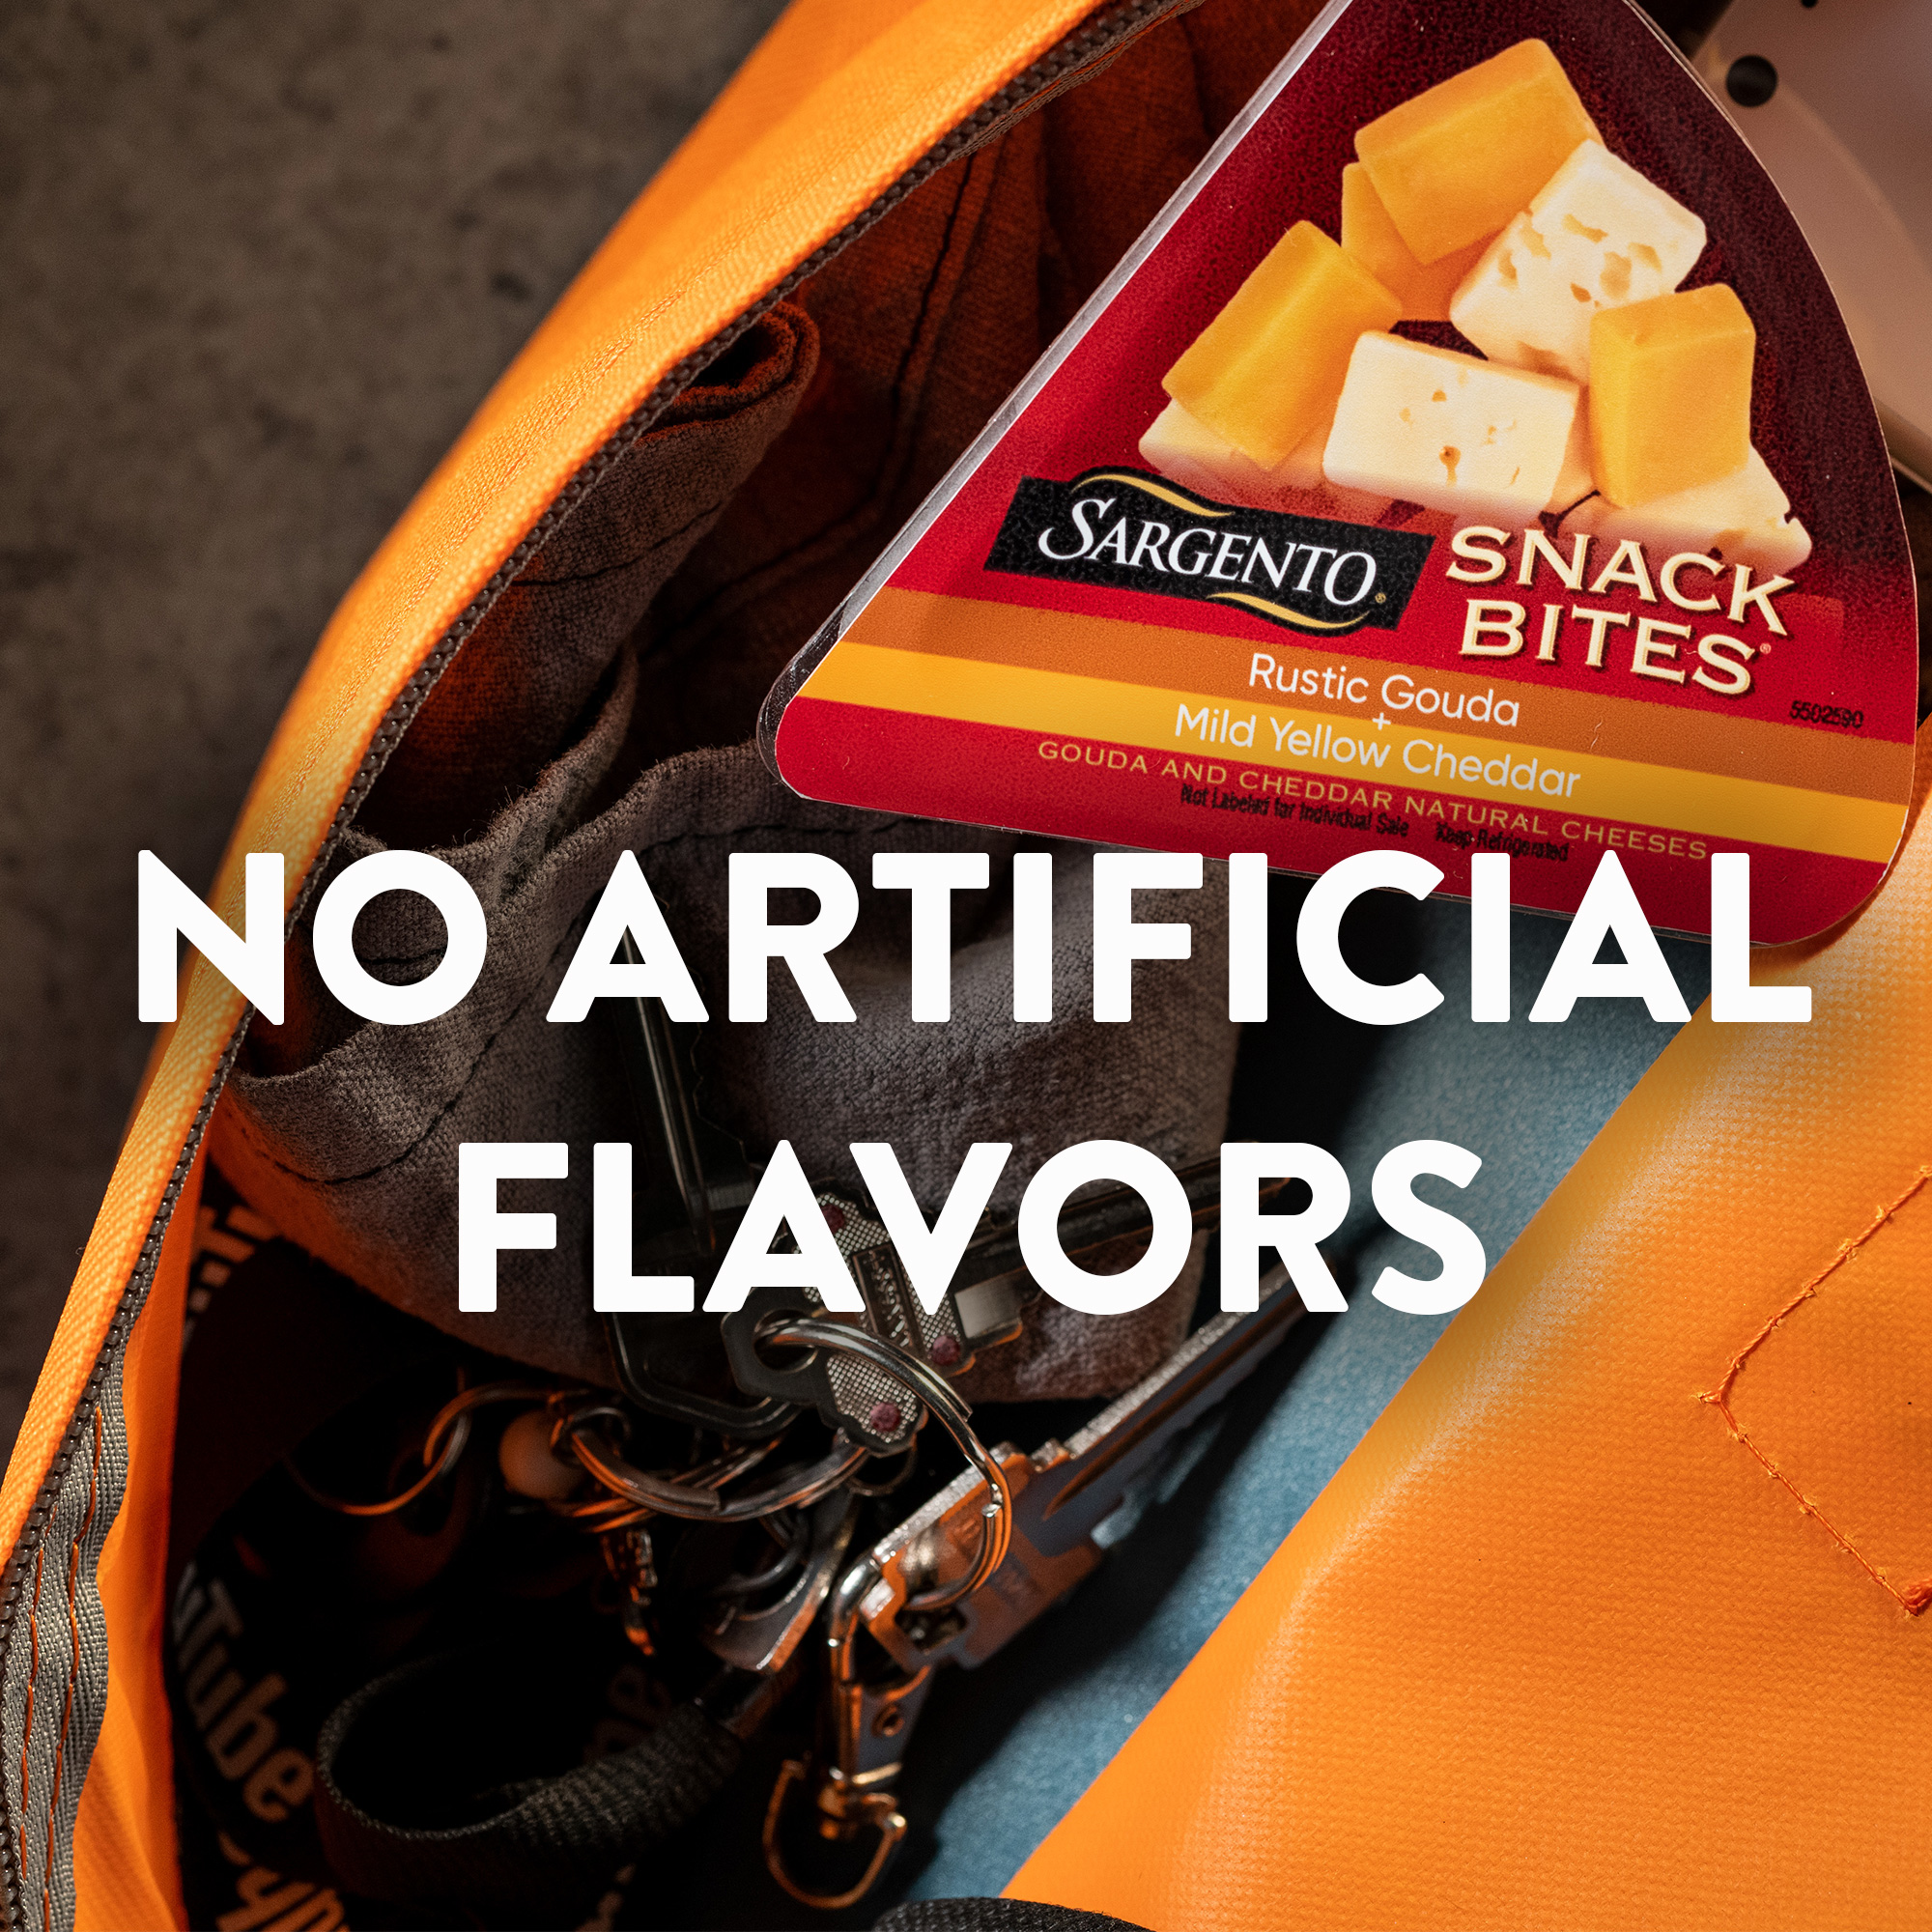 Sargento® Snack Bites® Rustic Gouda + Mild Yellow Cheddar Natural Cheeses